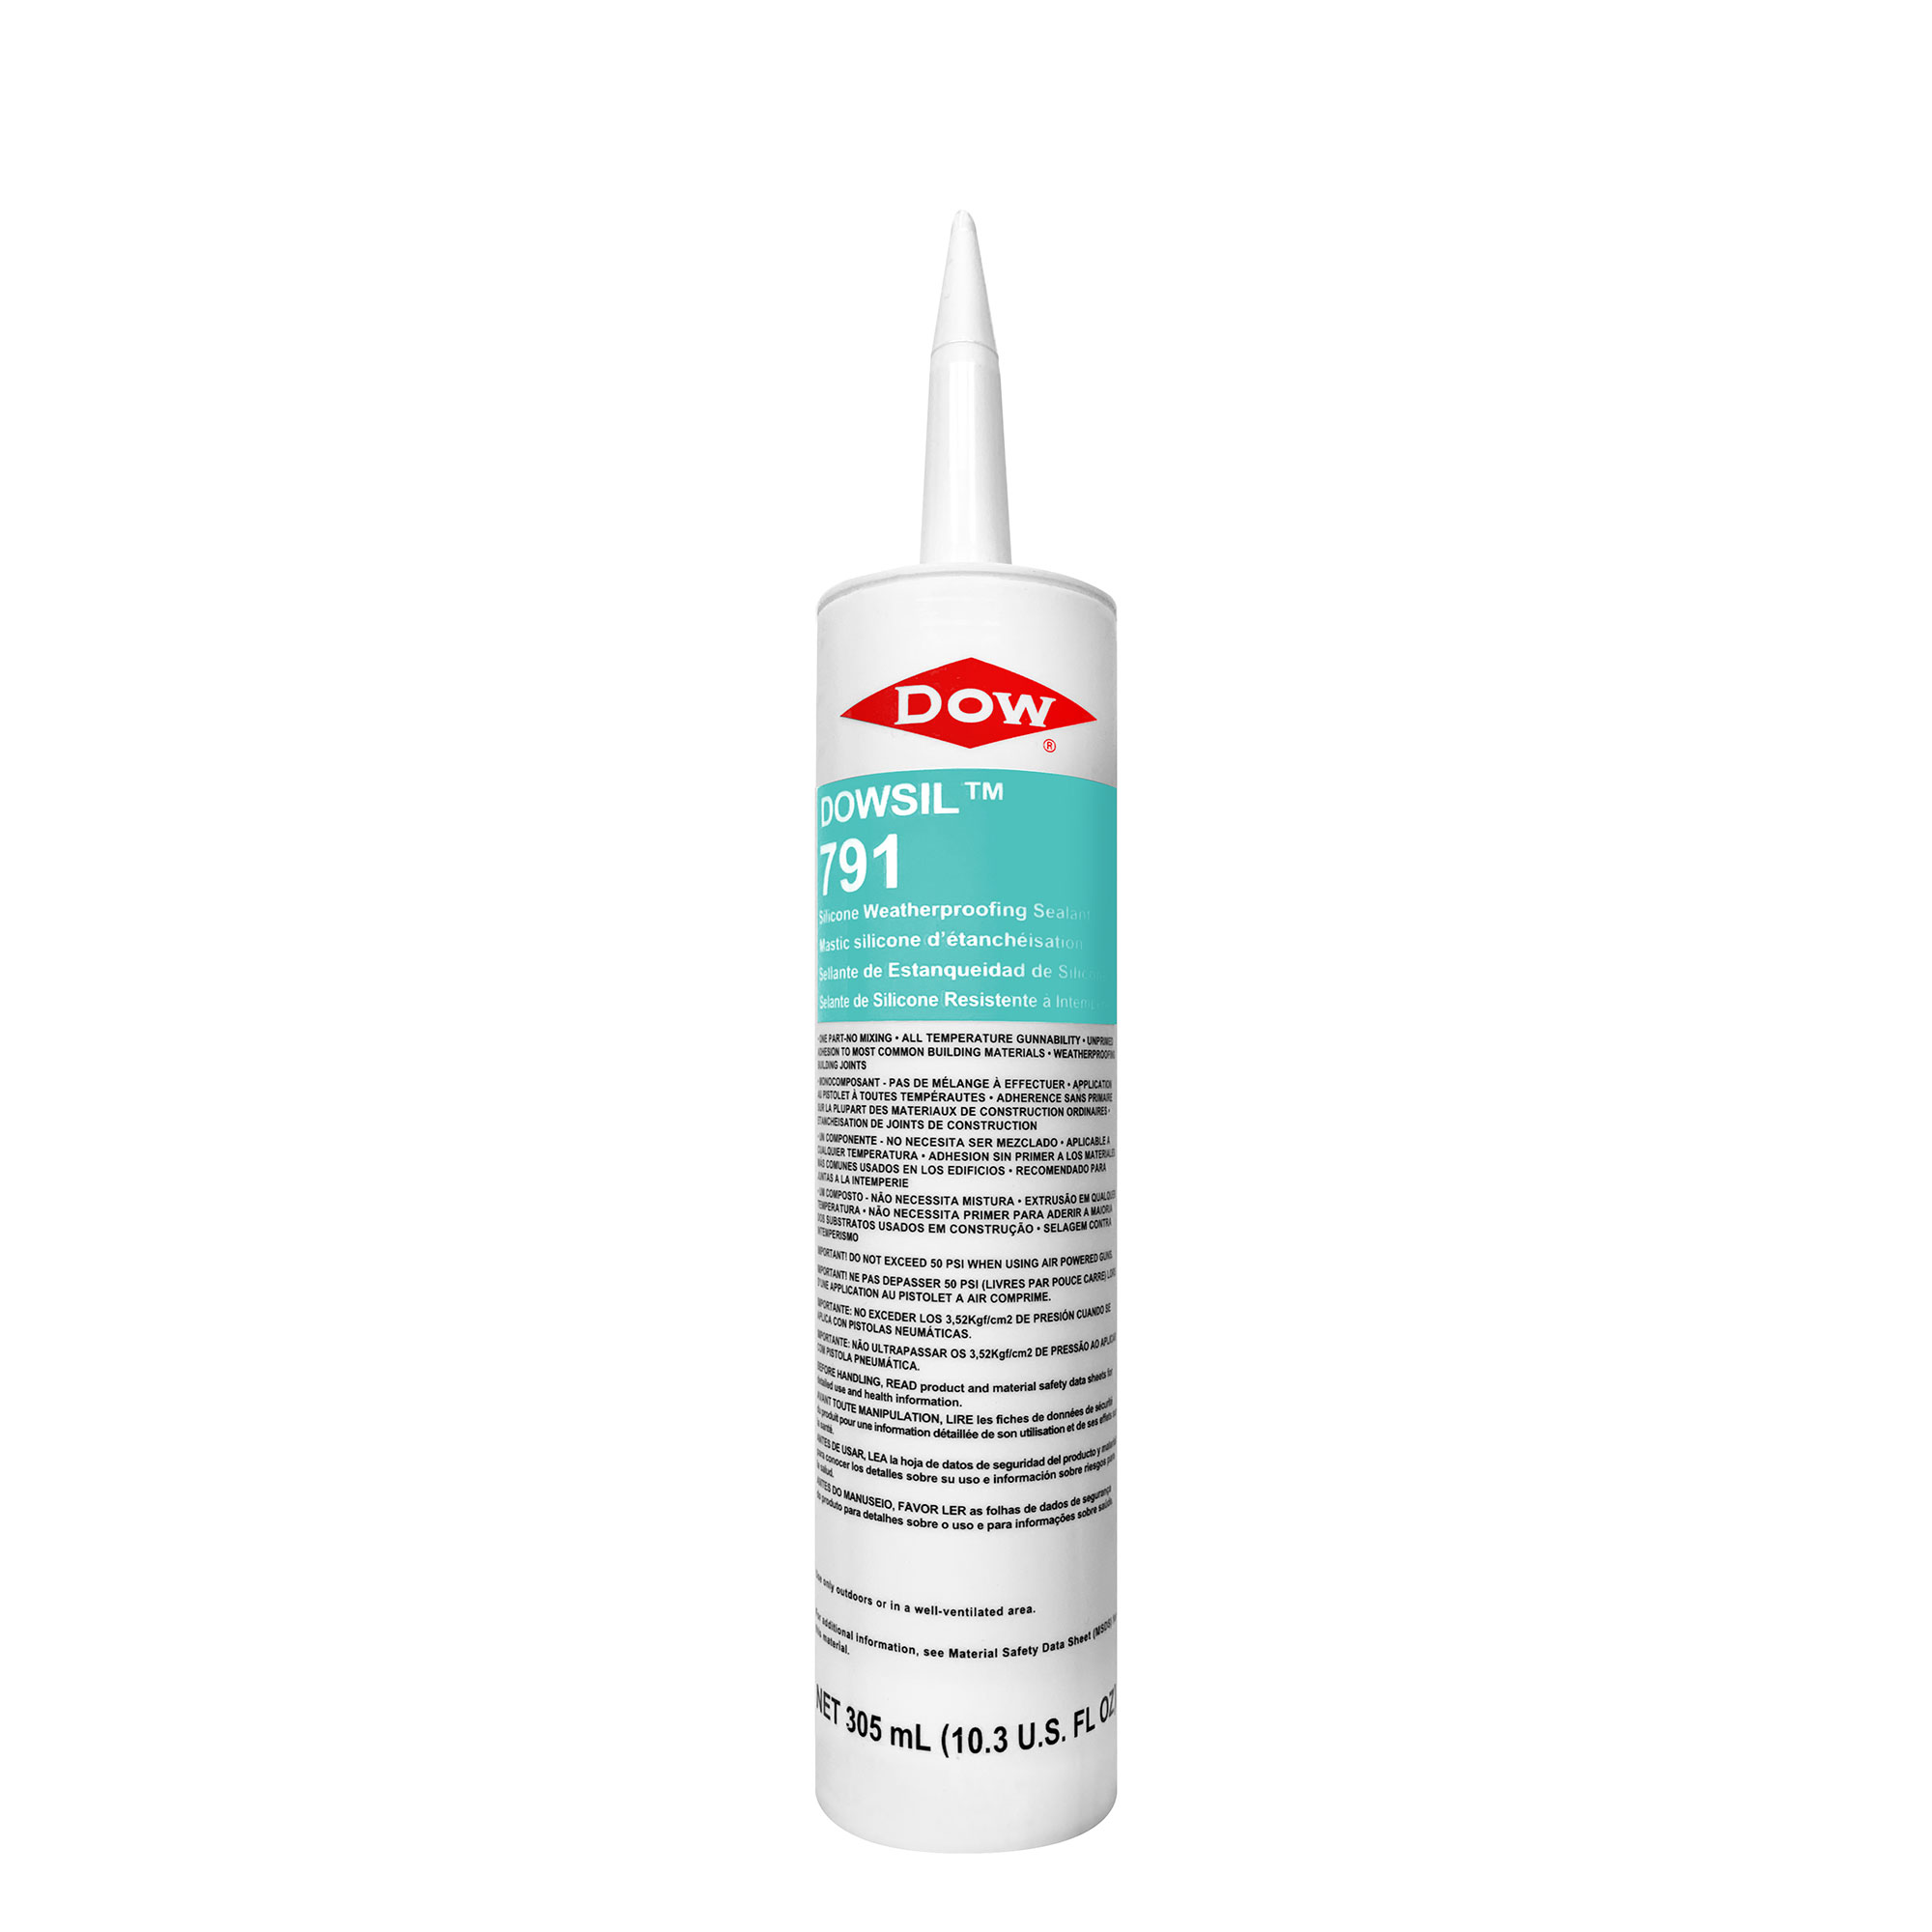 Dow Corning 791 Silicone Weatherproofing Sealant - 10.3 Fluid Ounce .